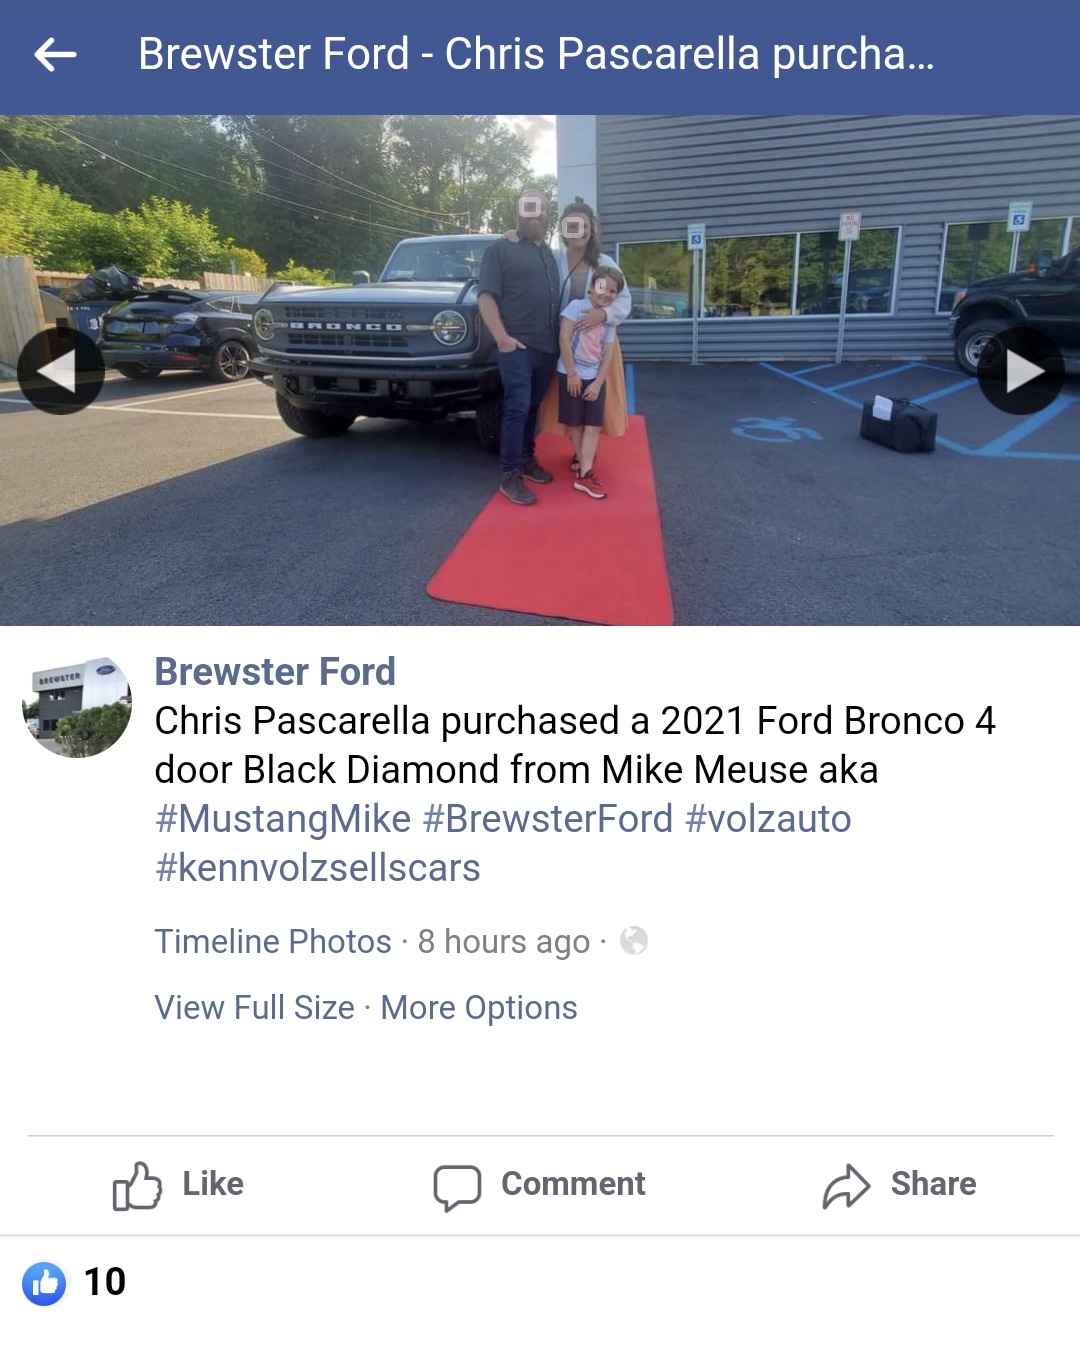 Ford Bronco NJ/NY/Delaware/Eastern Pa./MD/Ct Volume Buyers? 732AD90A-0C5F-4D9D-82B1-45CD71957BFB